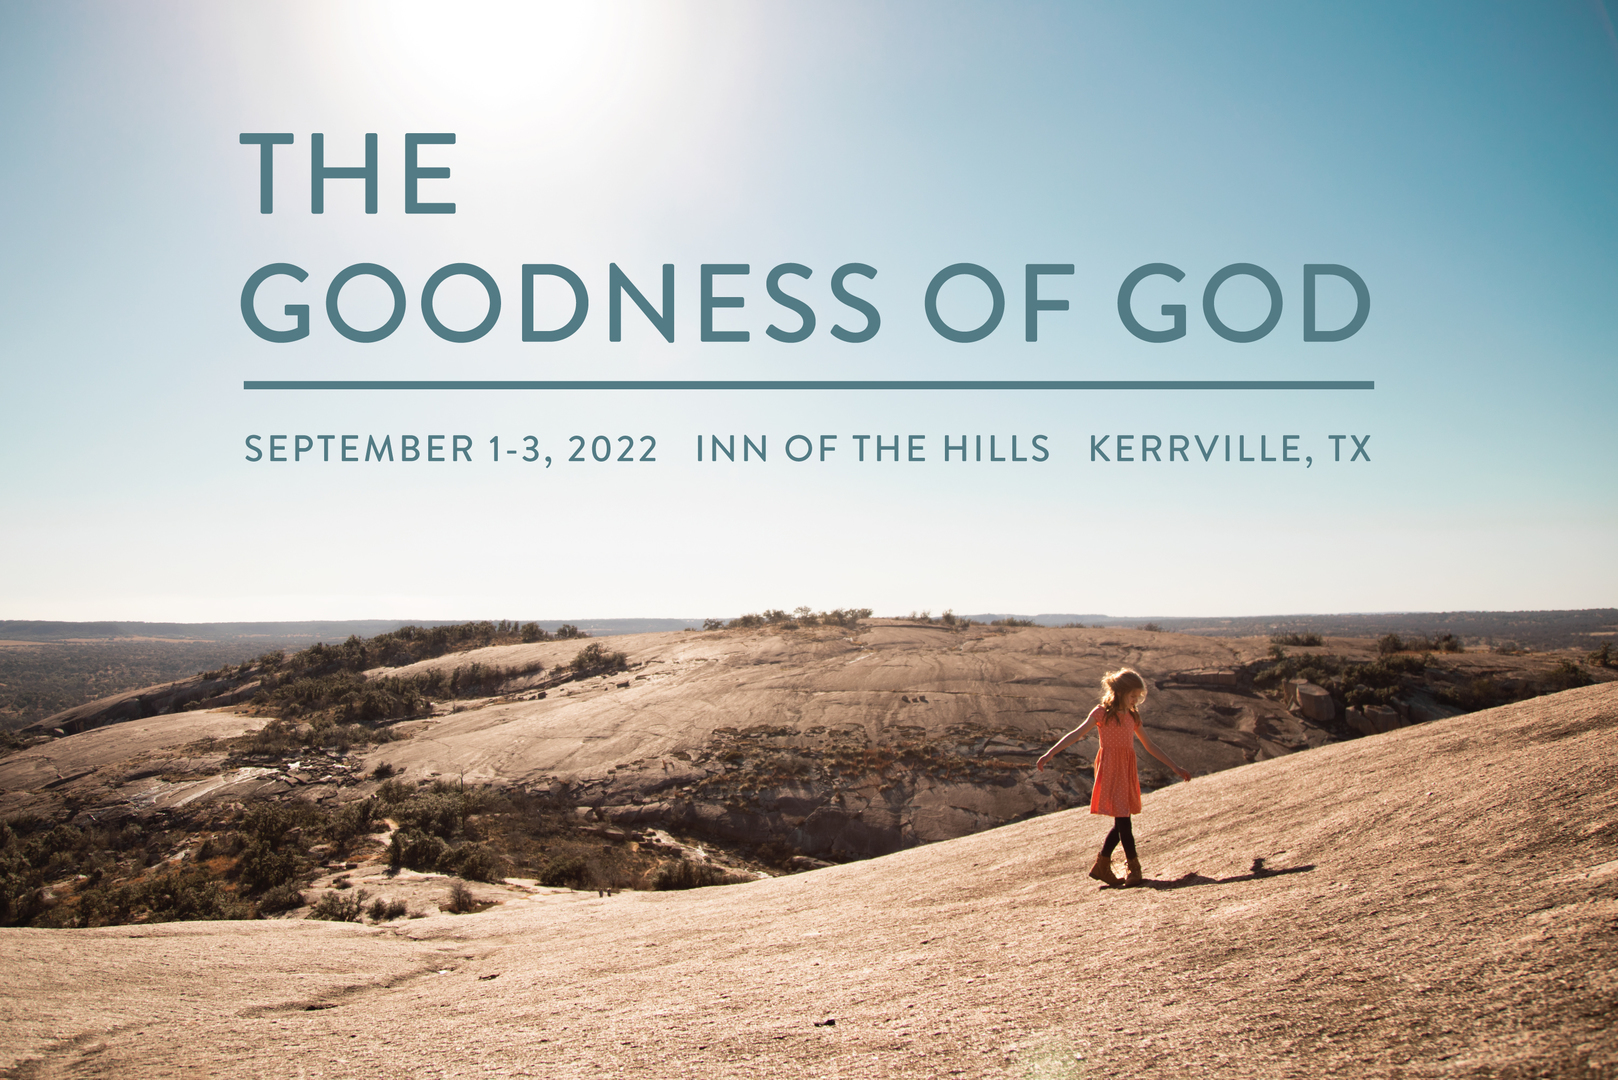 "The Goodness of God" Christian Family Conference Sept 1-3, 2022, Kerrville, Texas, United States